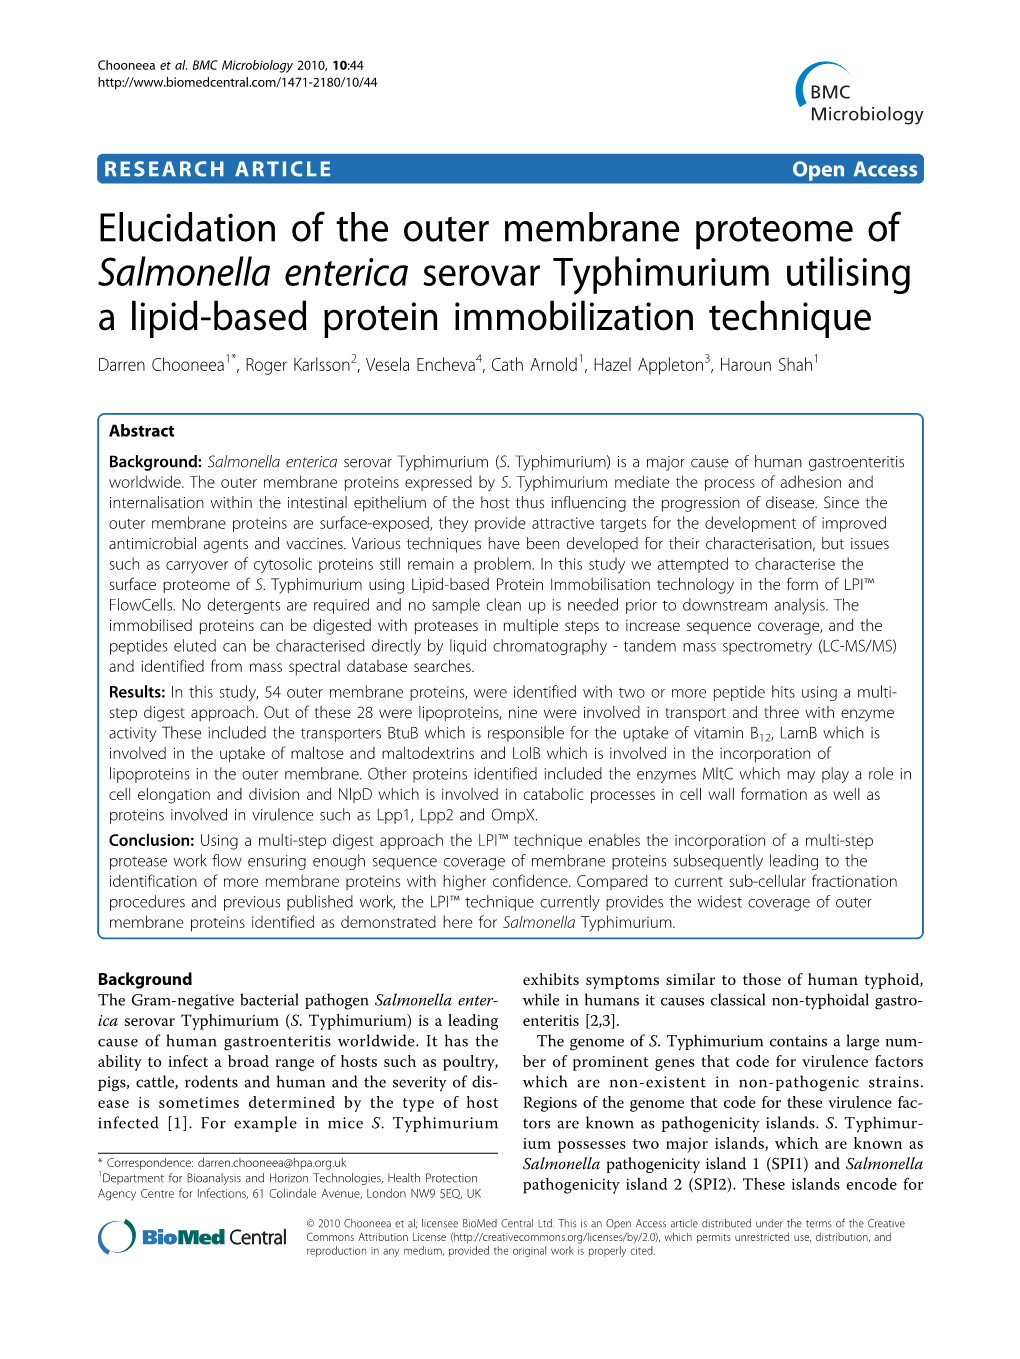 Elucidation of the Outer Membrane Proteome of Salmonella Enterica